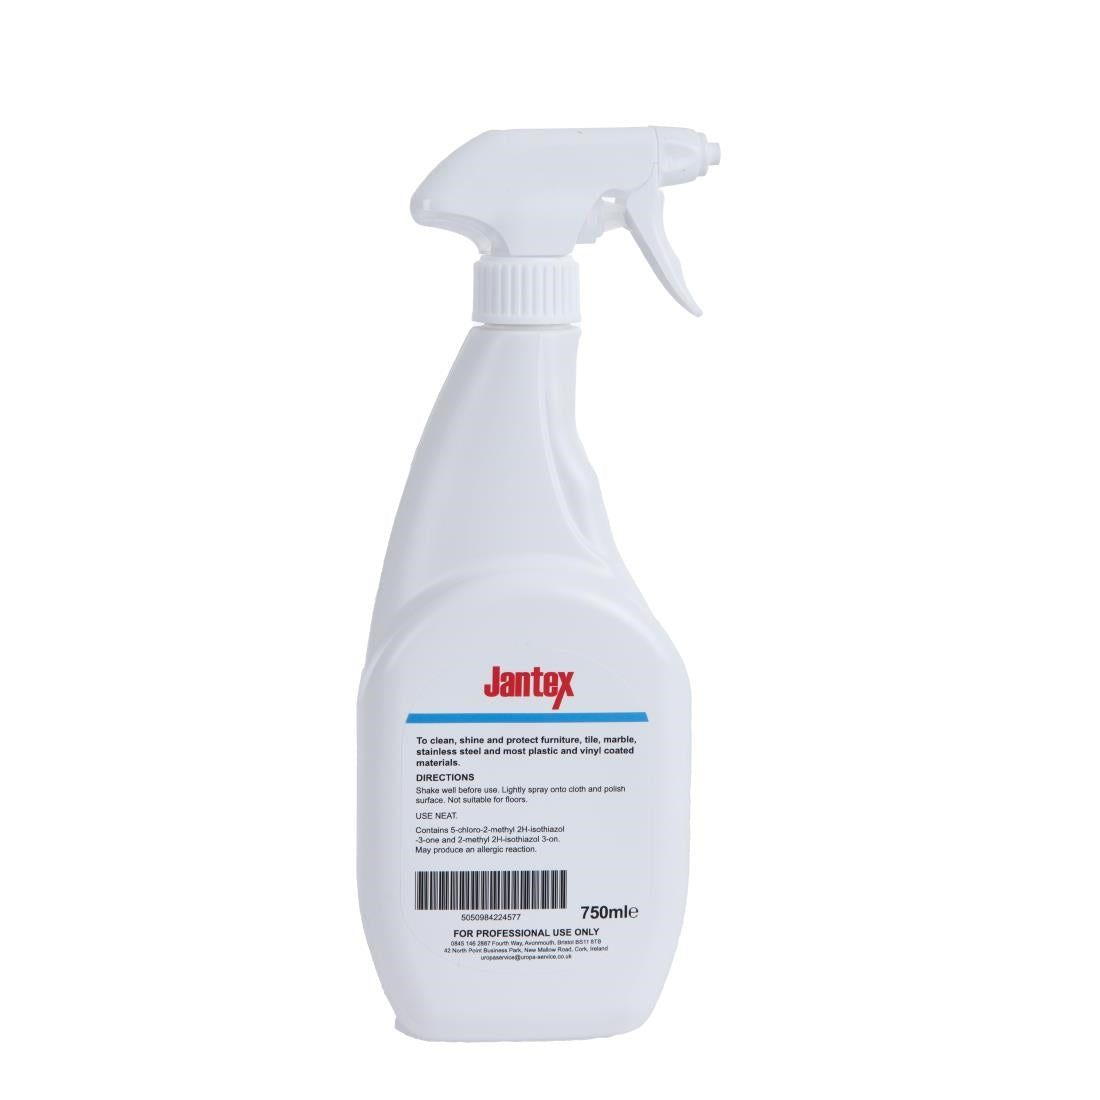 Jantex Furniture Polish Ready To Use 750ml JD Catering Equipment Solutions Ltd